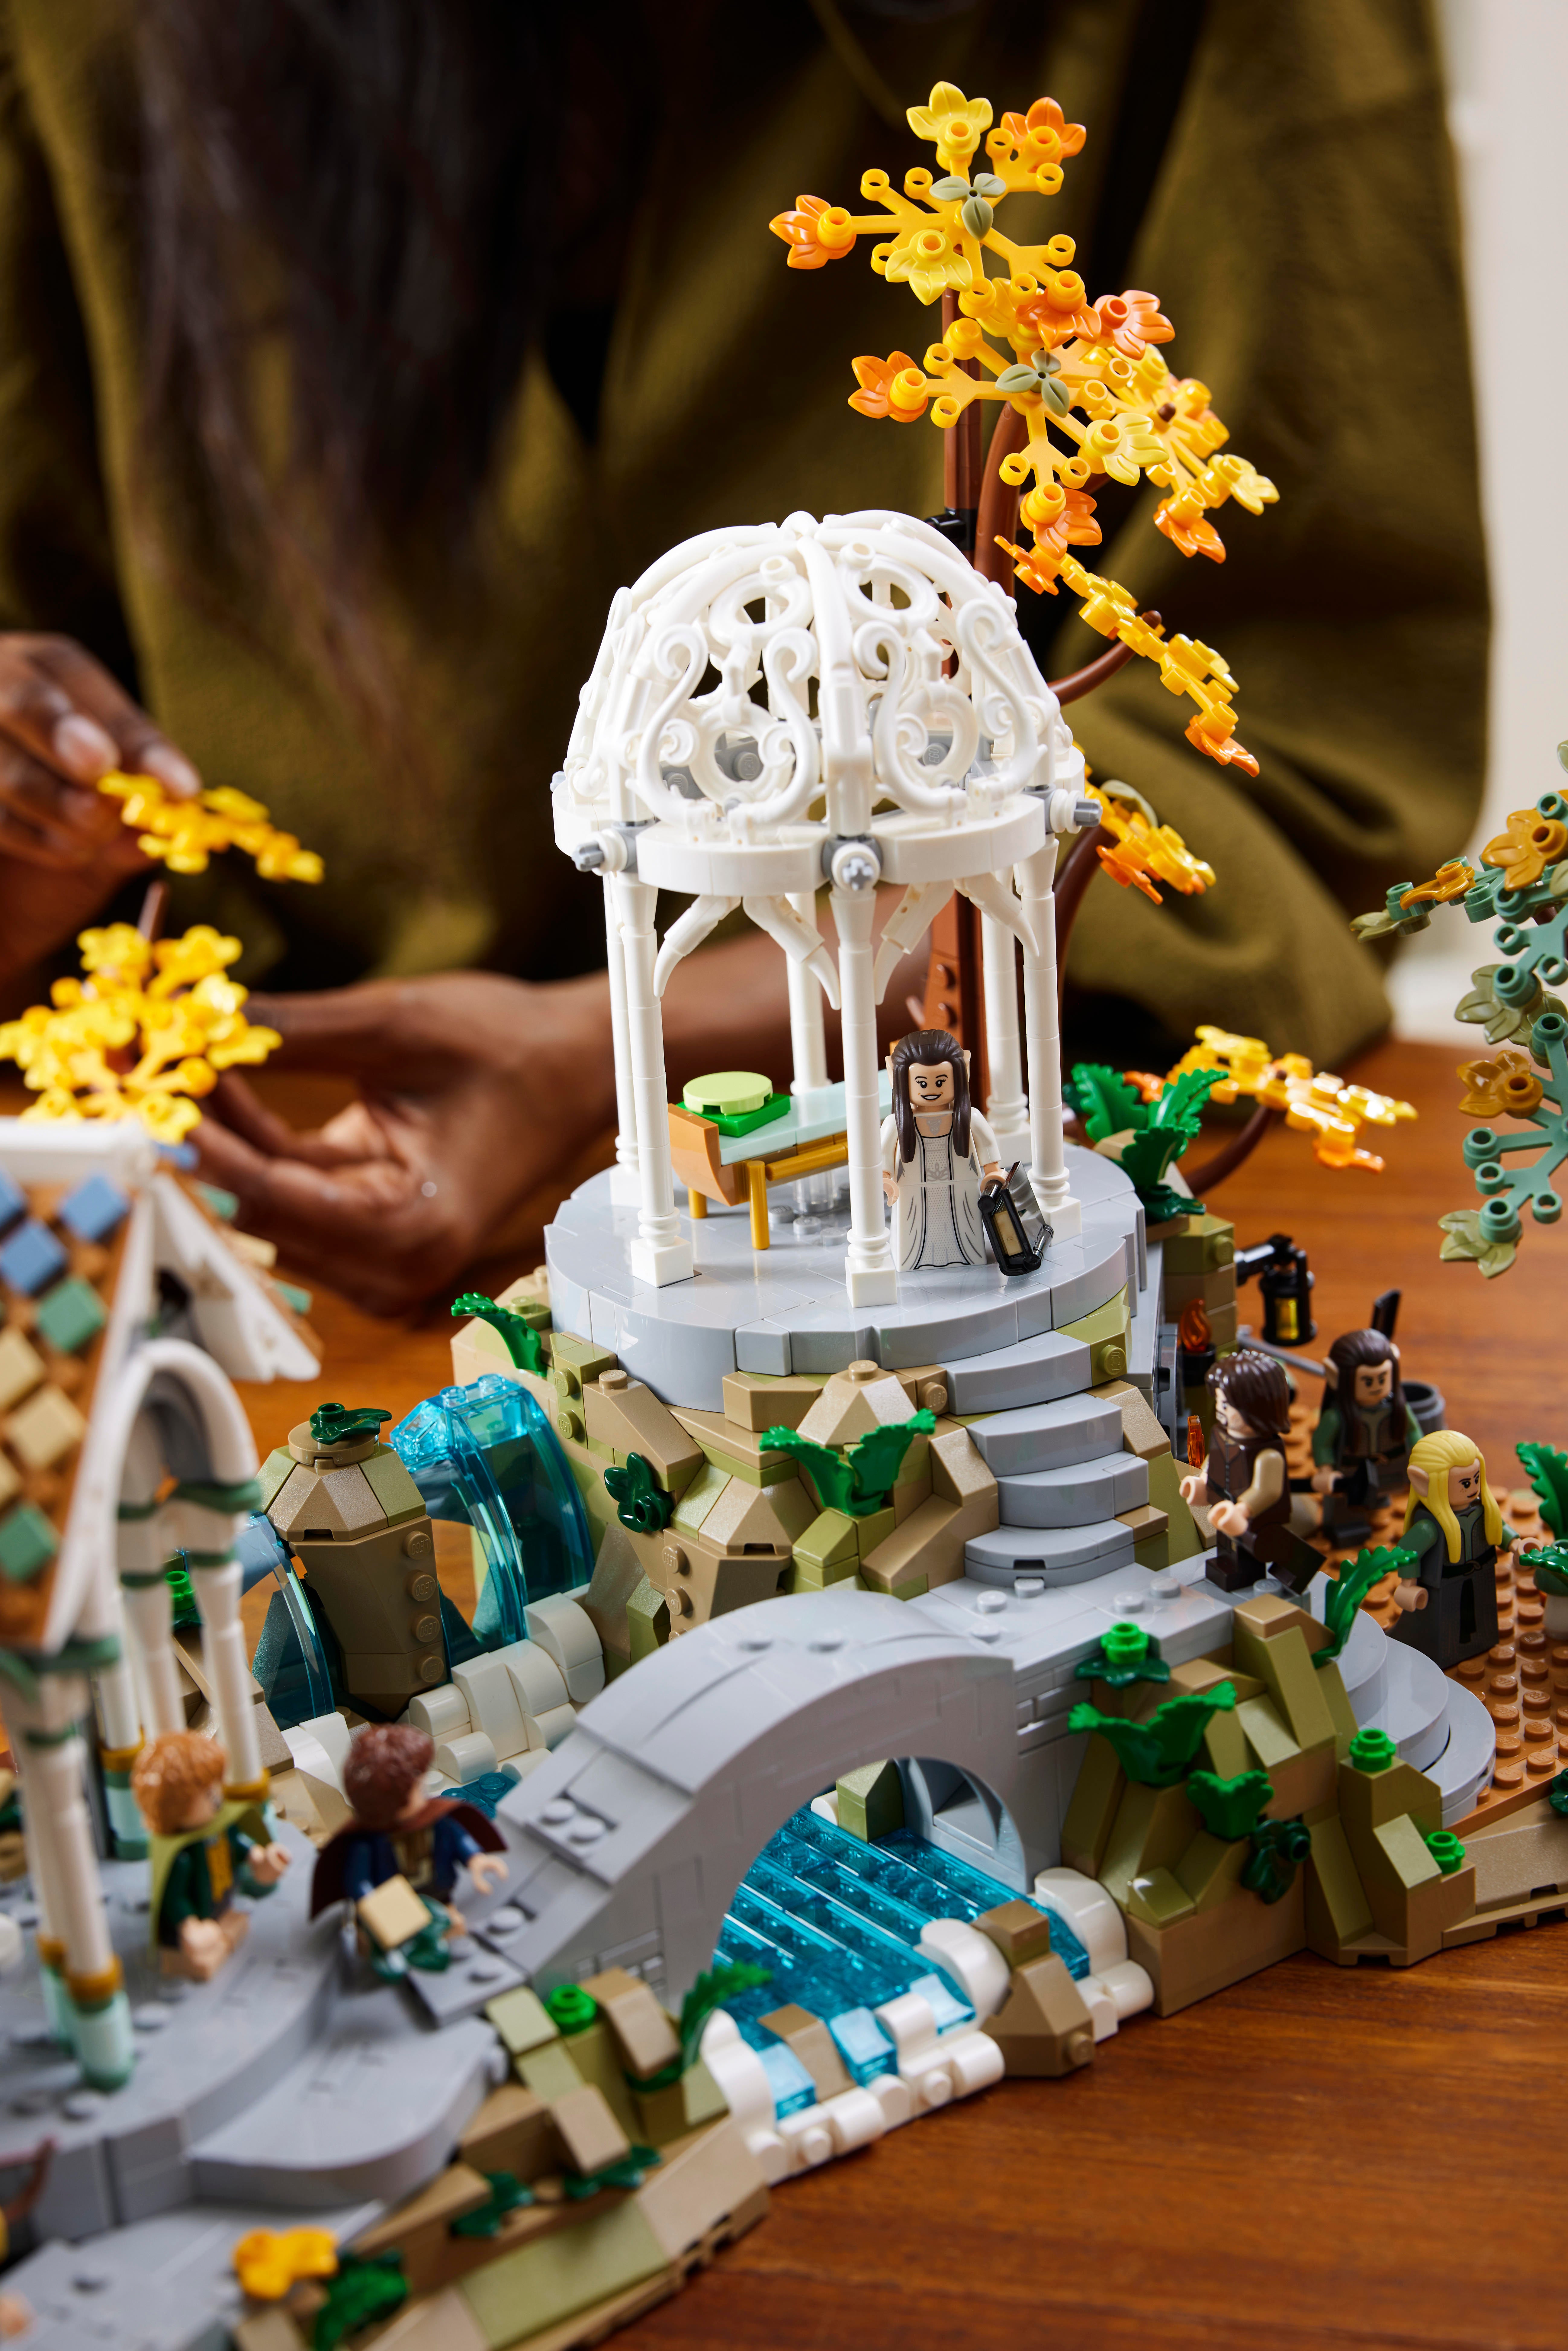 LEGO Icons 10316 Lord of the Rings - Rivendell